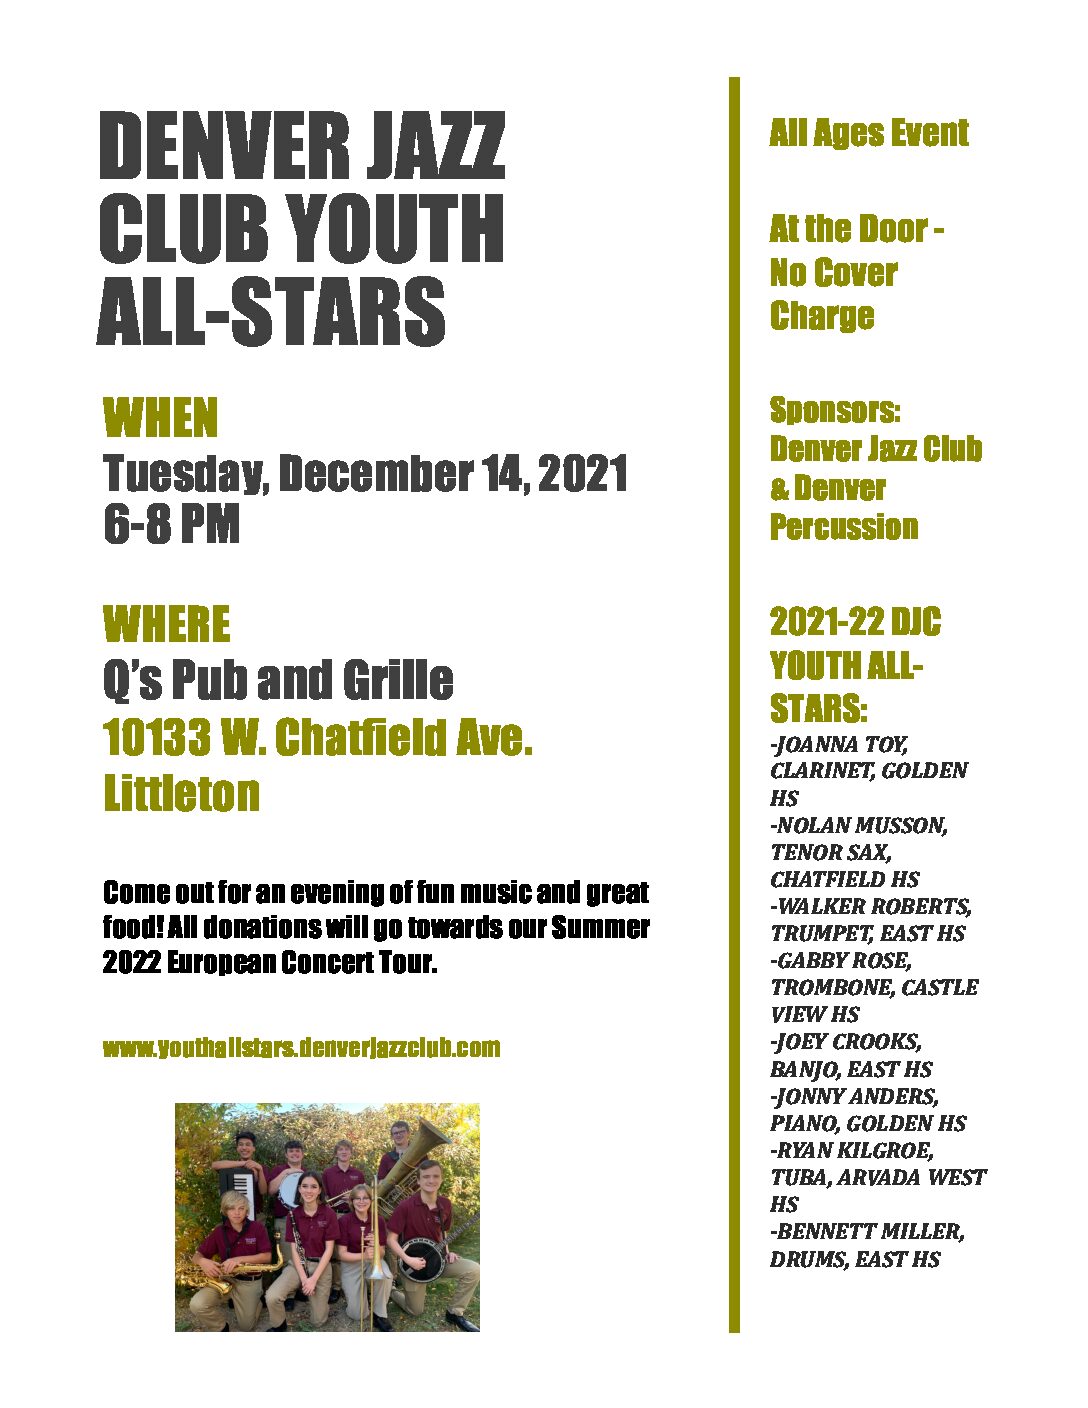 Q’s Pub and Grille to Feature the Denver Jazz Club Youth All-Stars on Tuesday, December 14th (6-8pm)